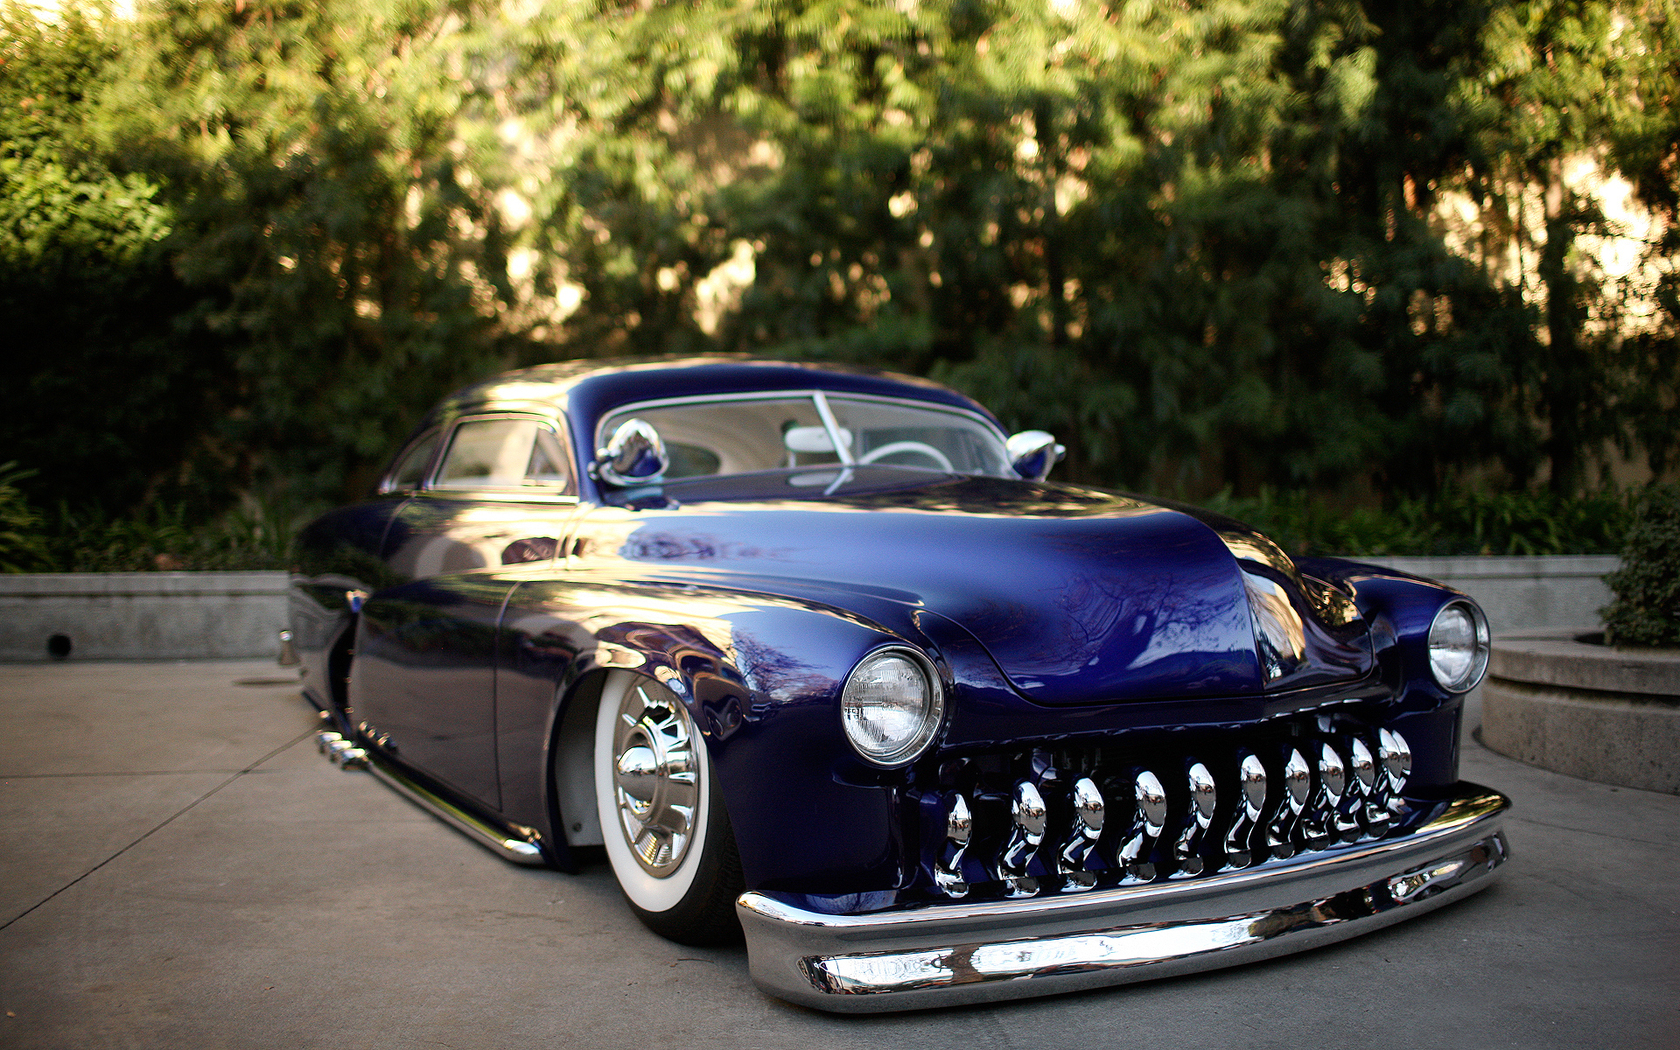 Lead Sled Parking